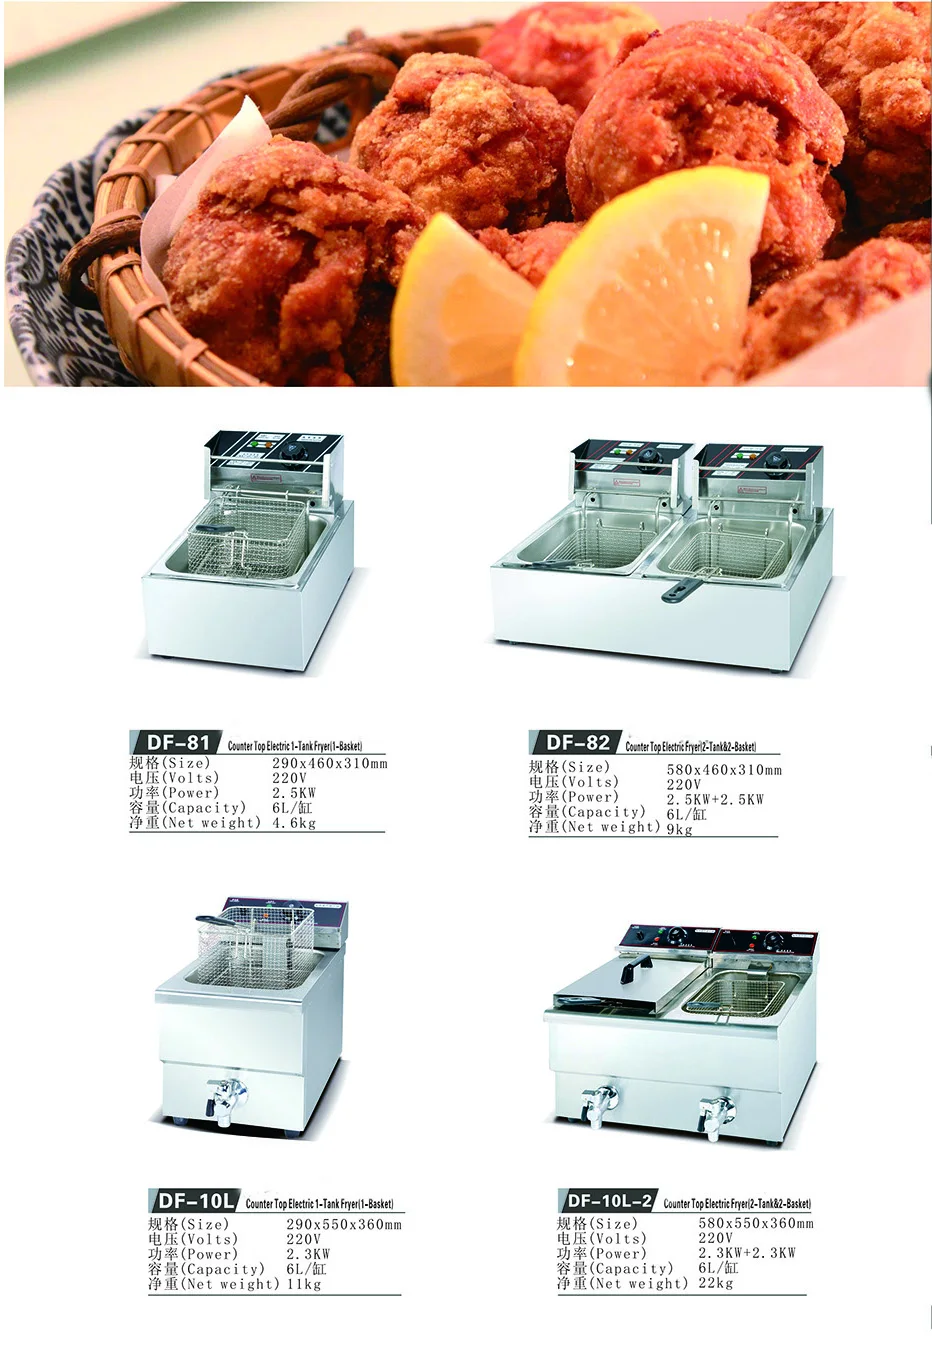 12.5L Stainless Steel Cointe Top Electric-Tank Fryer 1-Basket 1 Tank Electric Fryer Electric Deep Fryer Pan Frying Pots